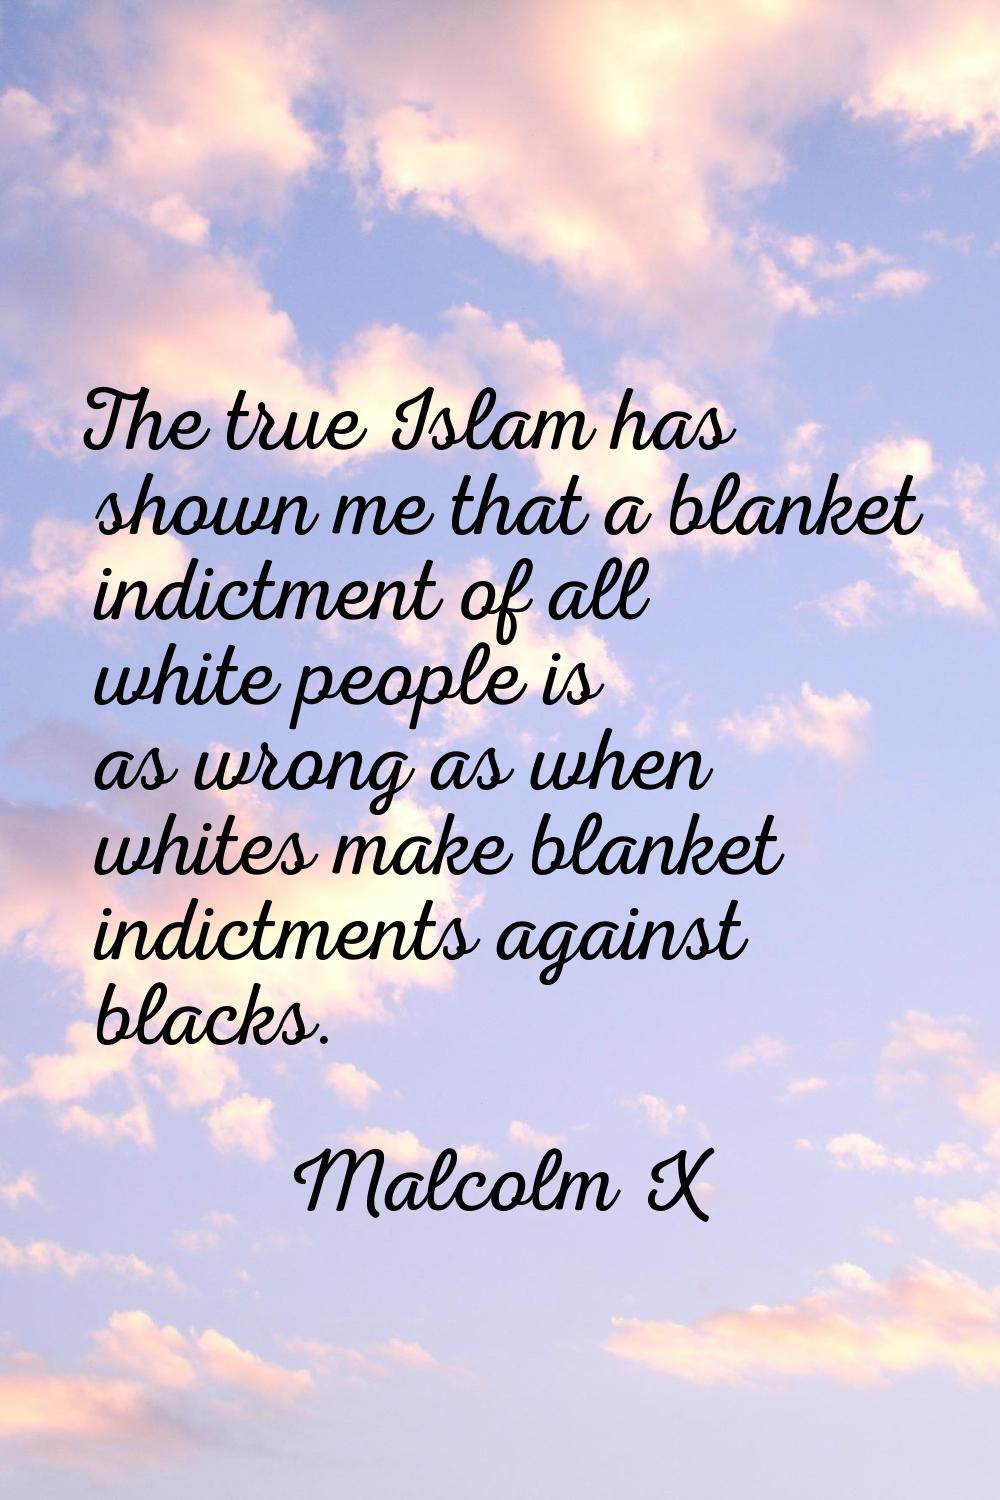 The true Islam has shown me that a blanket indictment of all white people is as wrong as when white